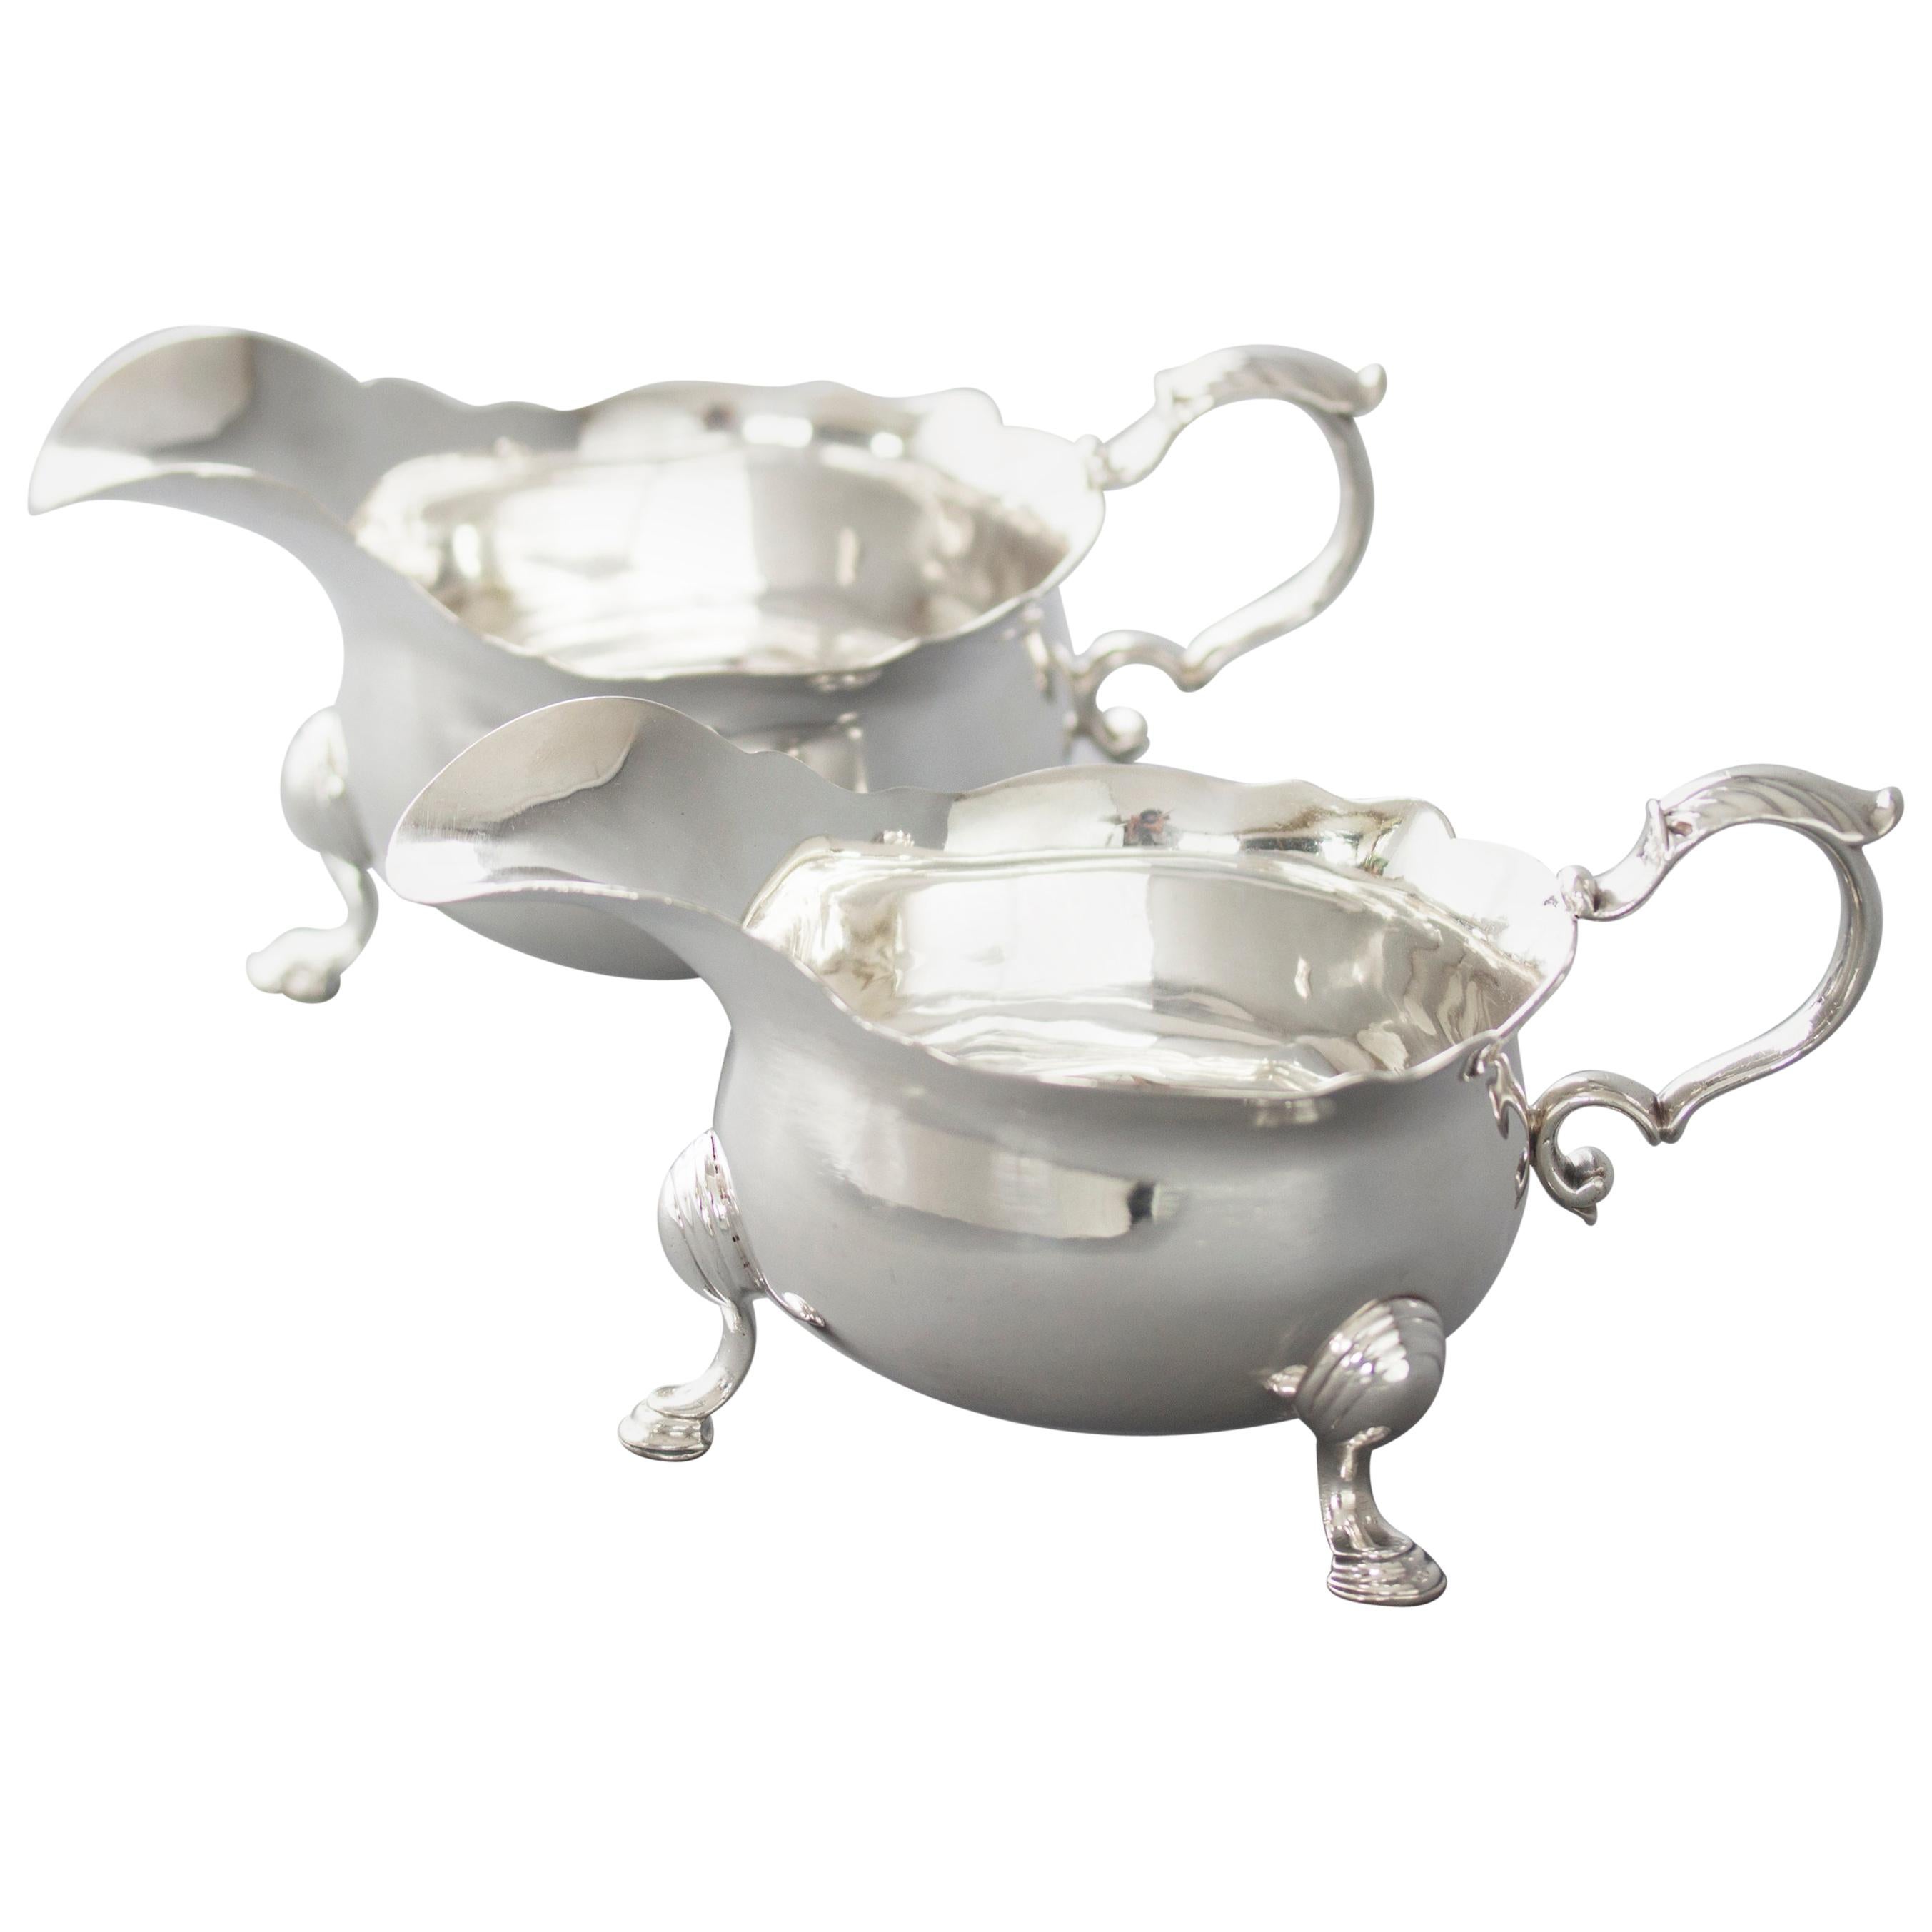 Pair of George II Silver Sauce Boats, London, 1737 by Benjamin West